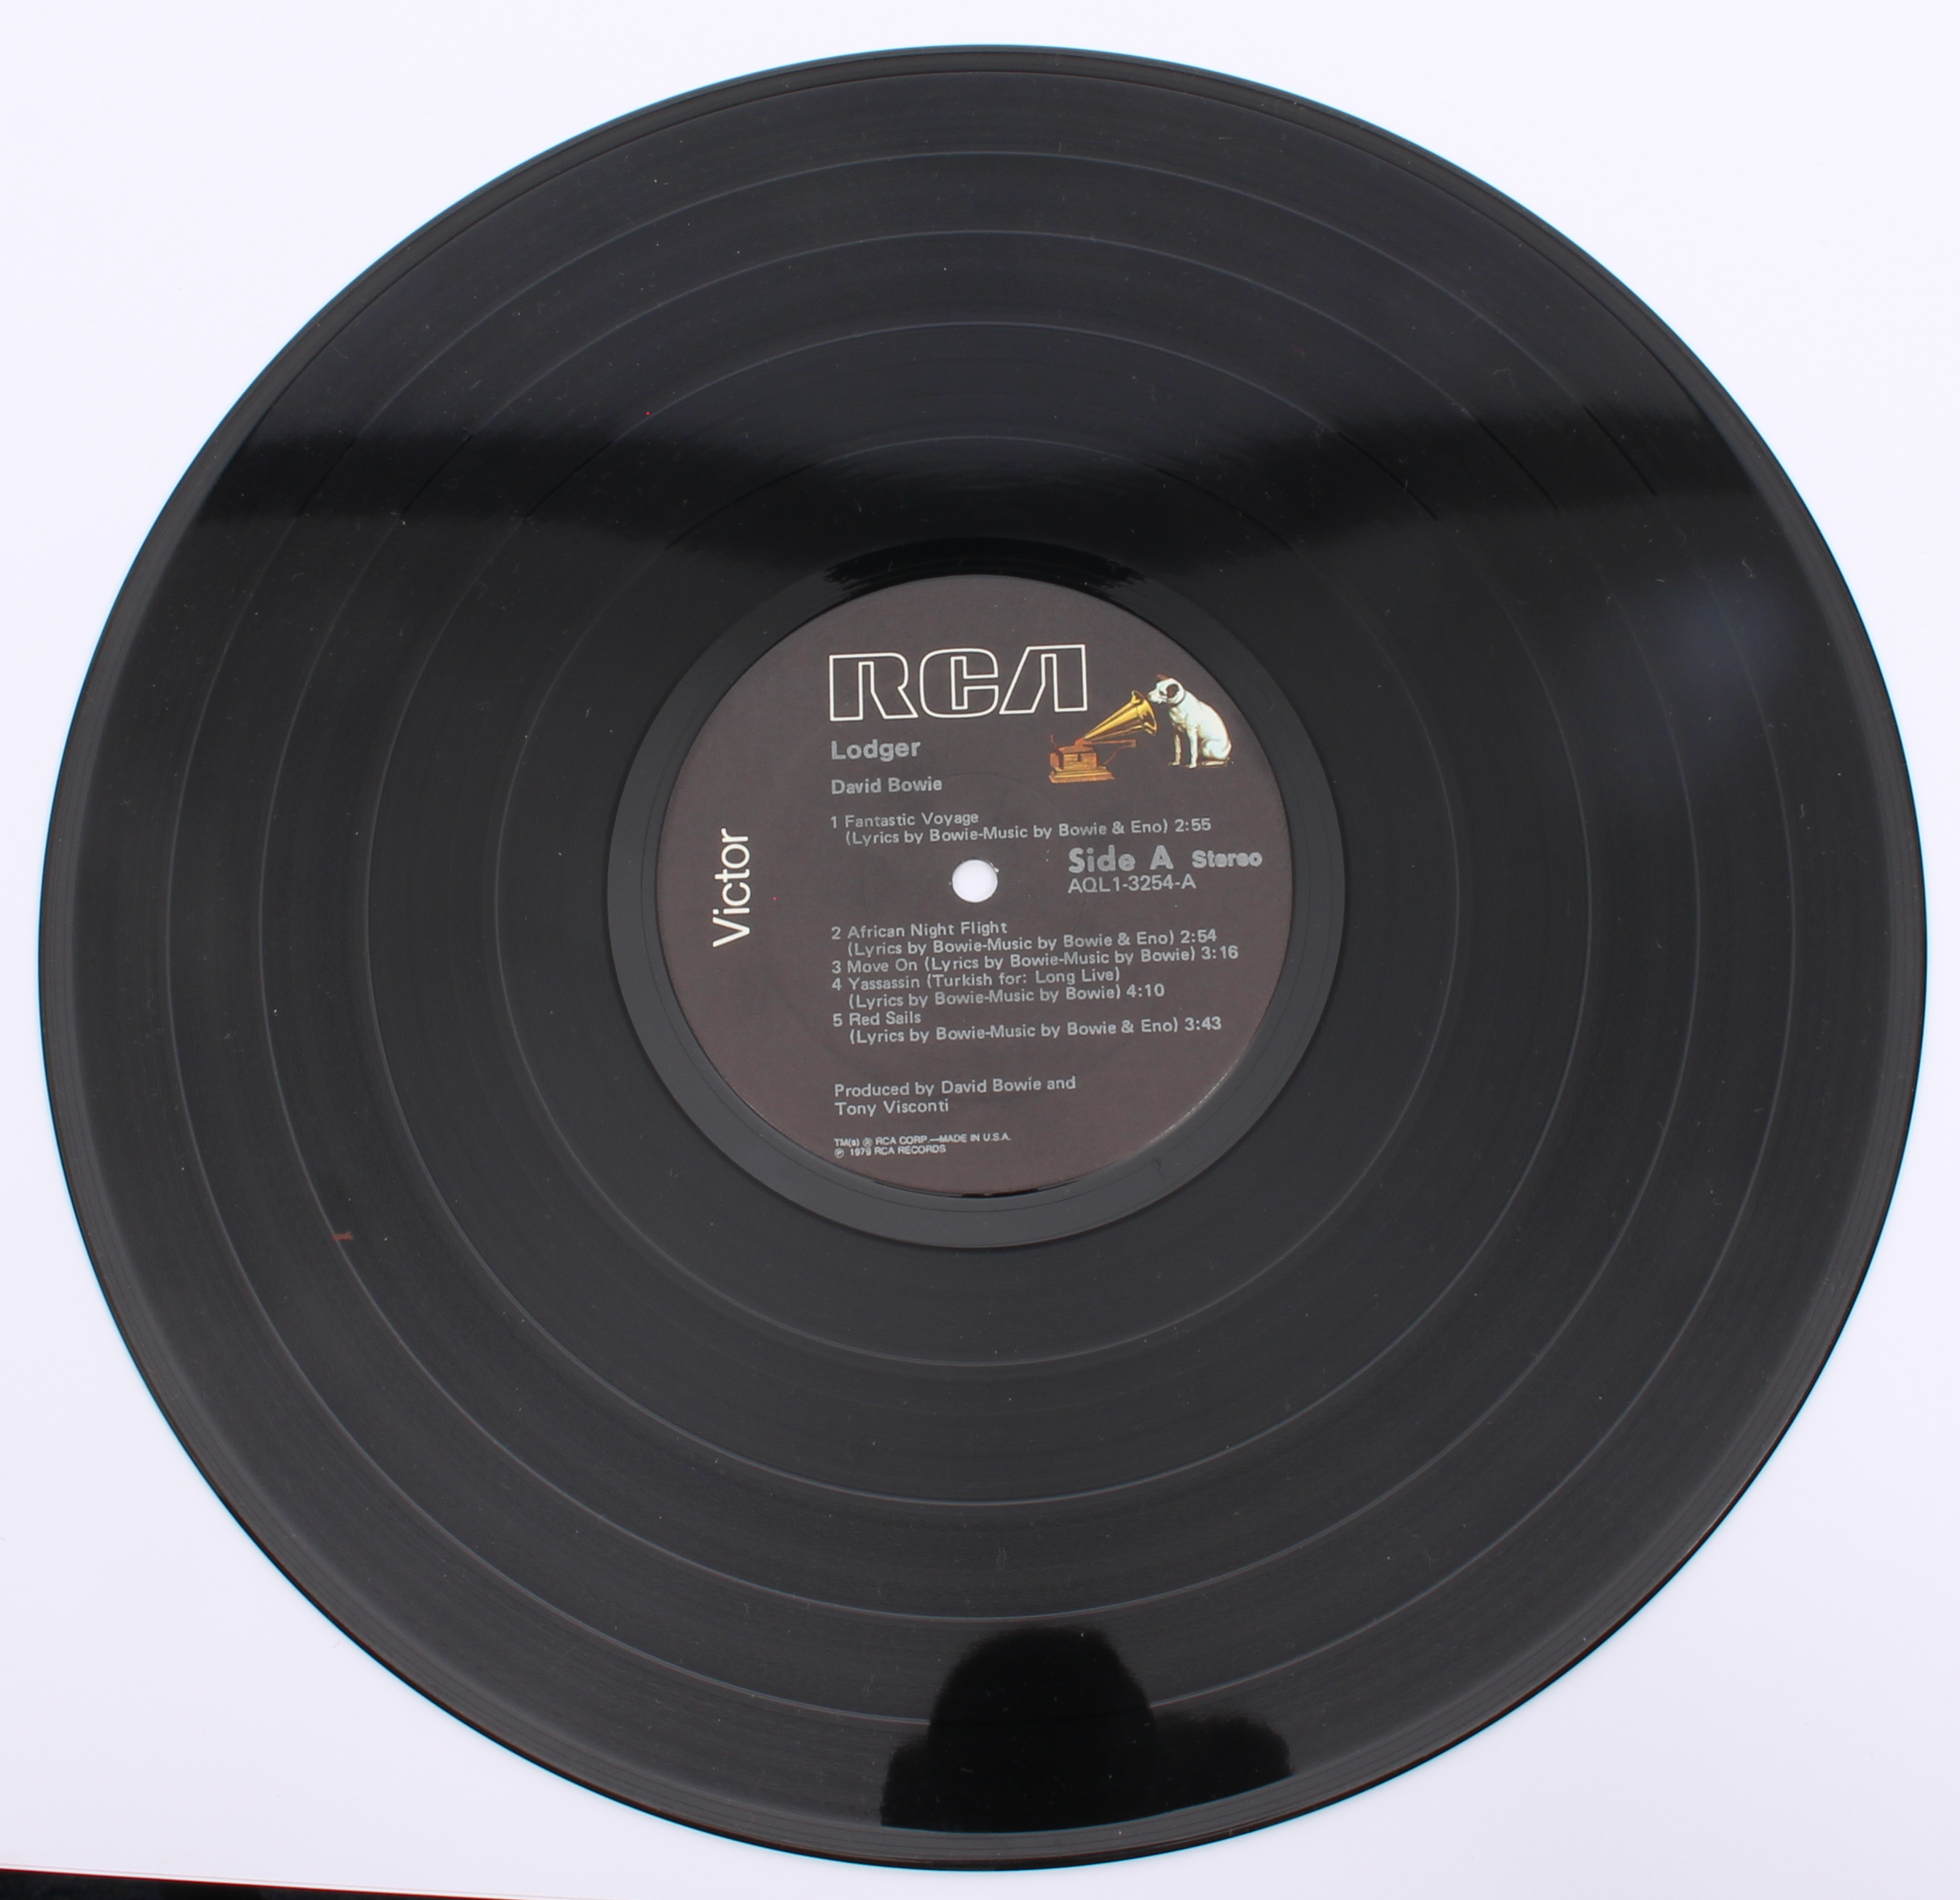 Vinyl / Autographs - David Bowie - Lodger. Original UK album pressing signed on the front by Brian - Image 4 of 5